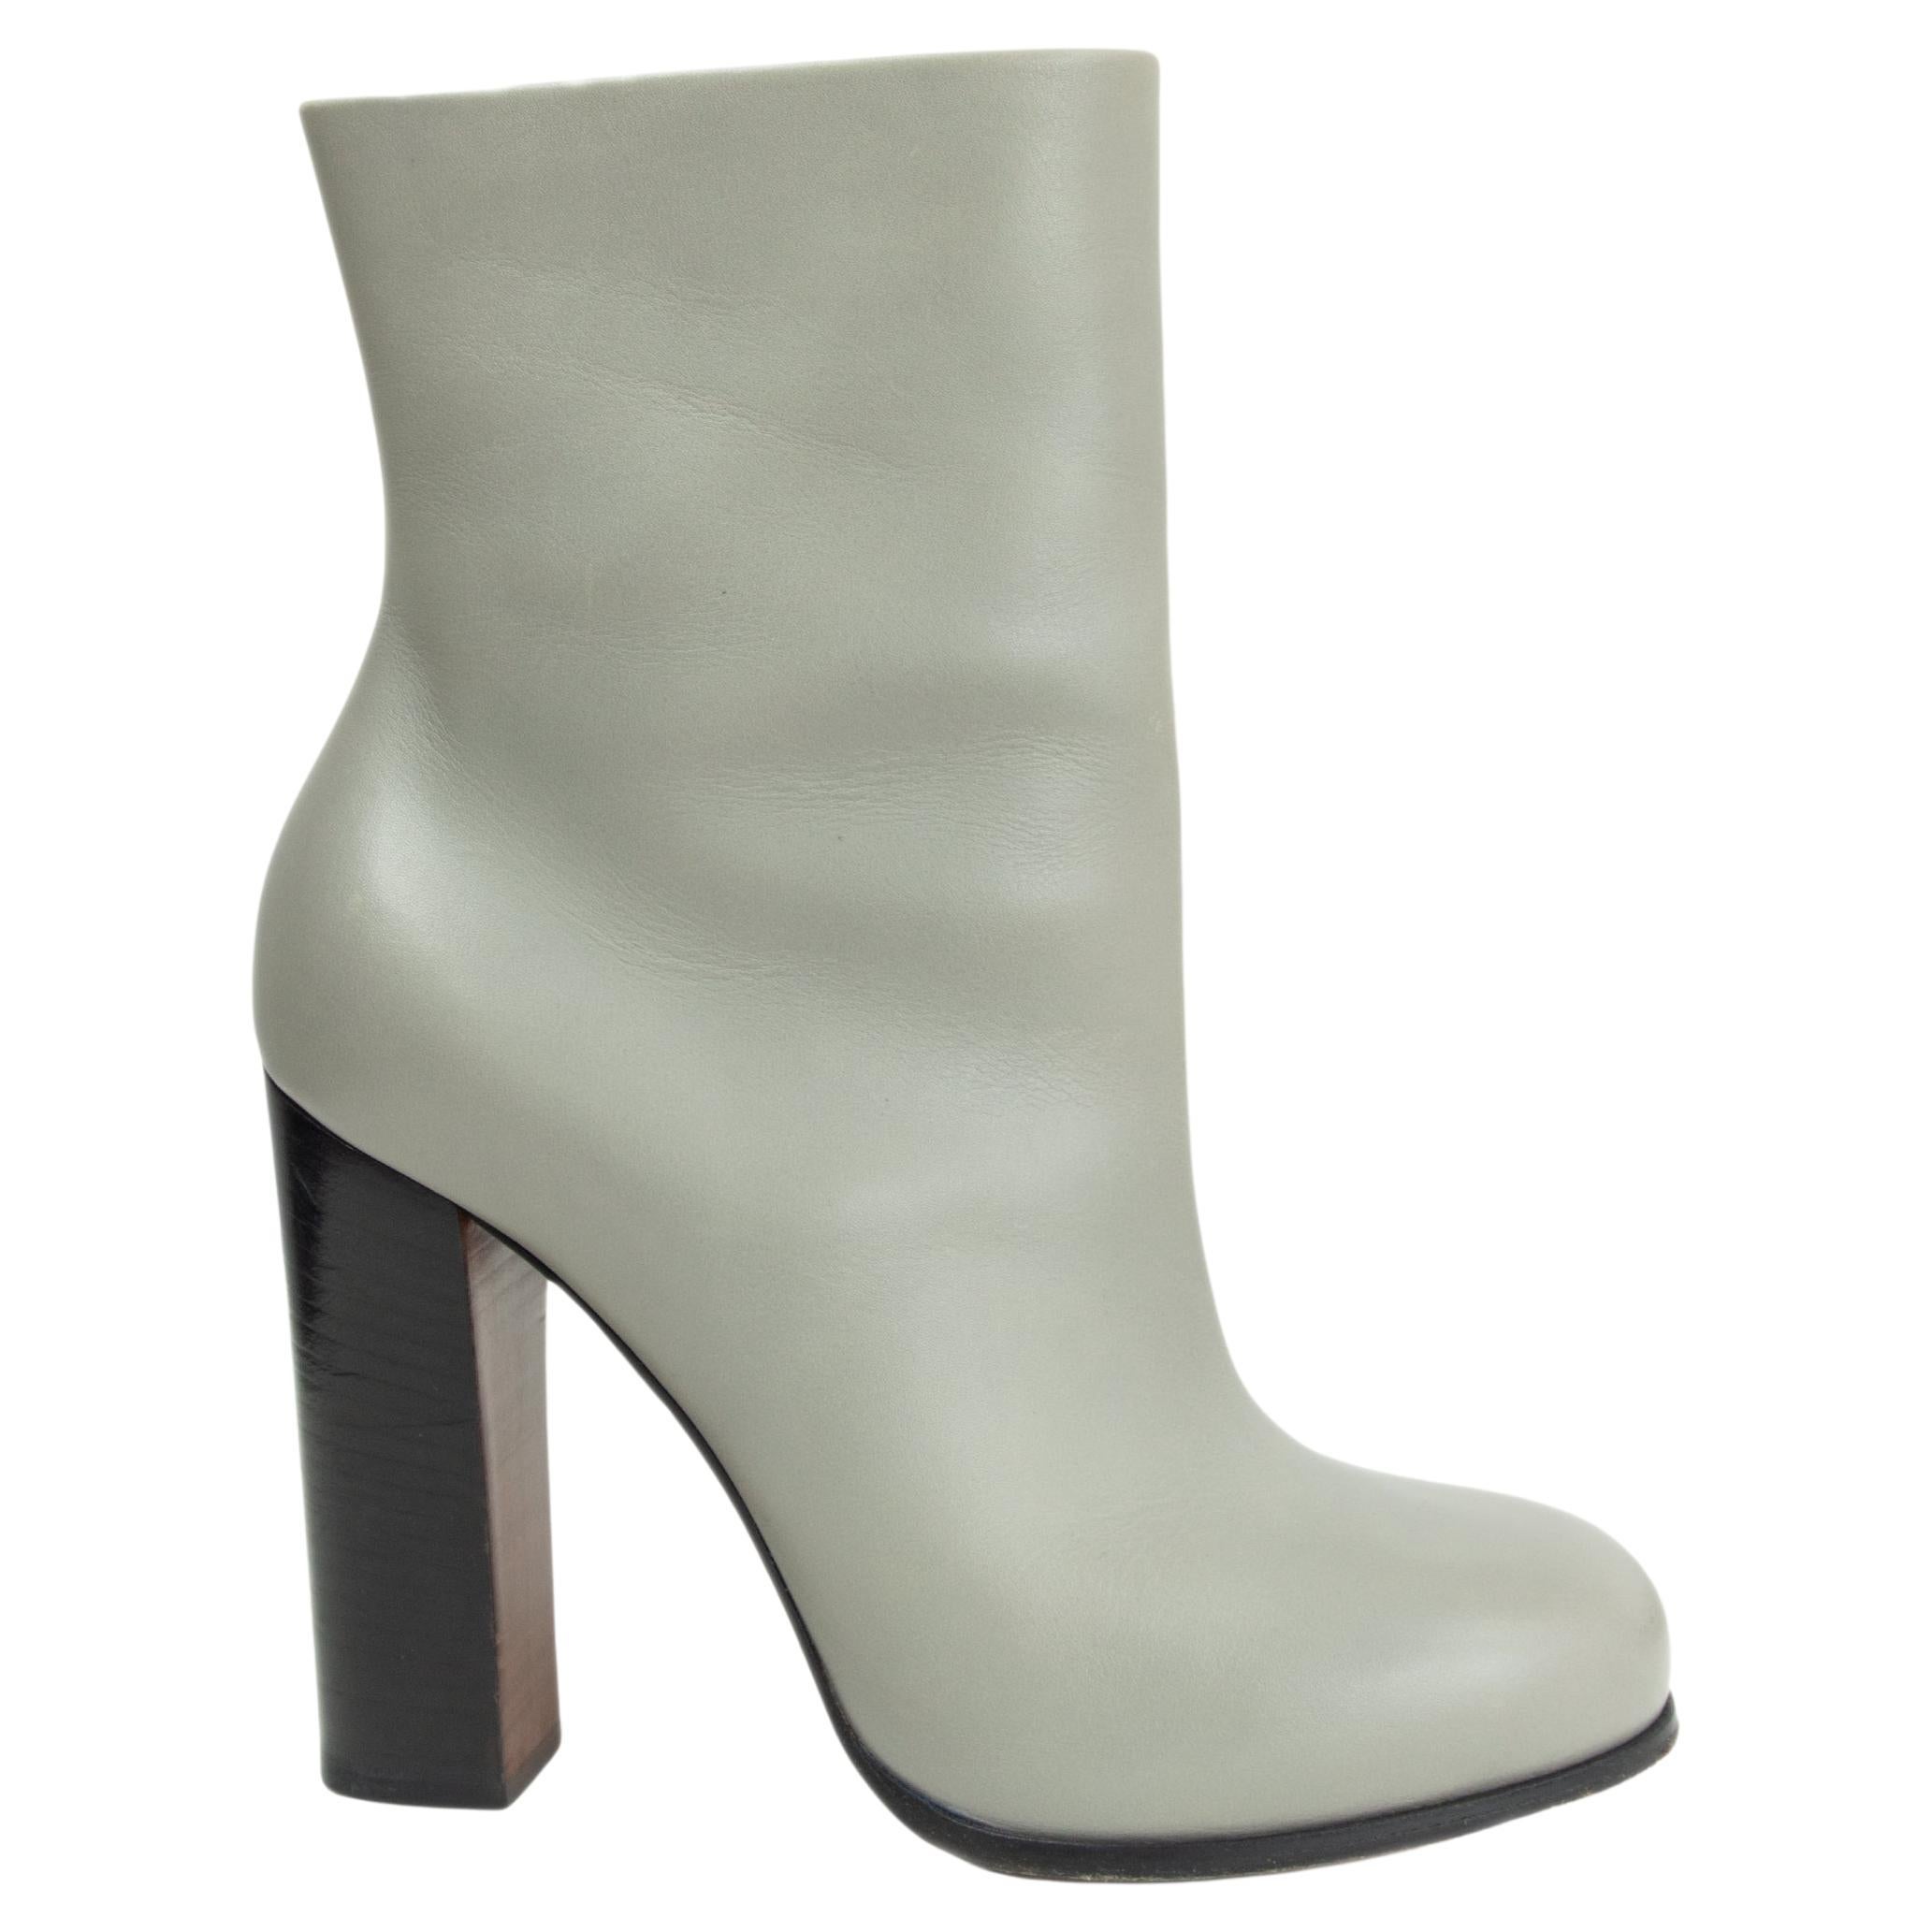 CELINE pale grey leather 2013 BLOCK HEEL Ankle Boots Shoes 37 For Sale